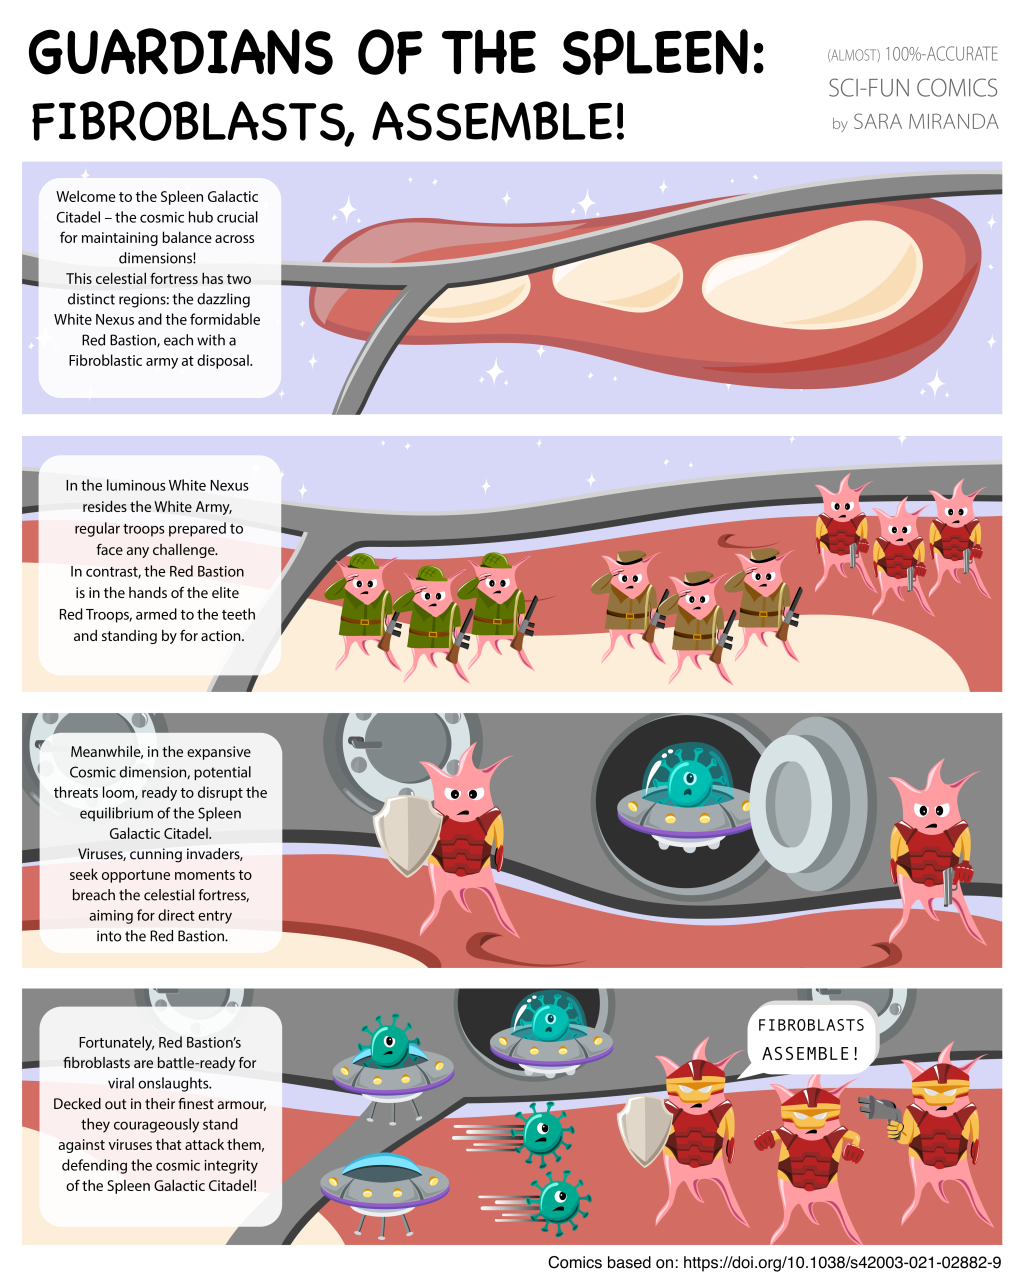 Fibroblasts Assemble! – our paper turned into a “sci-fun” comic